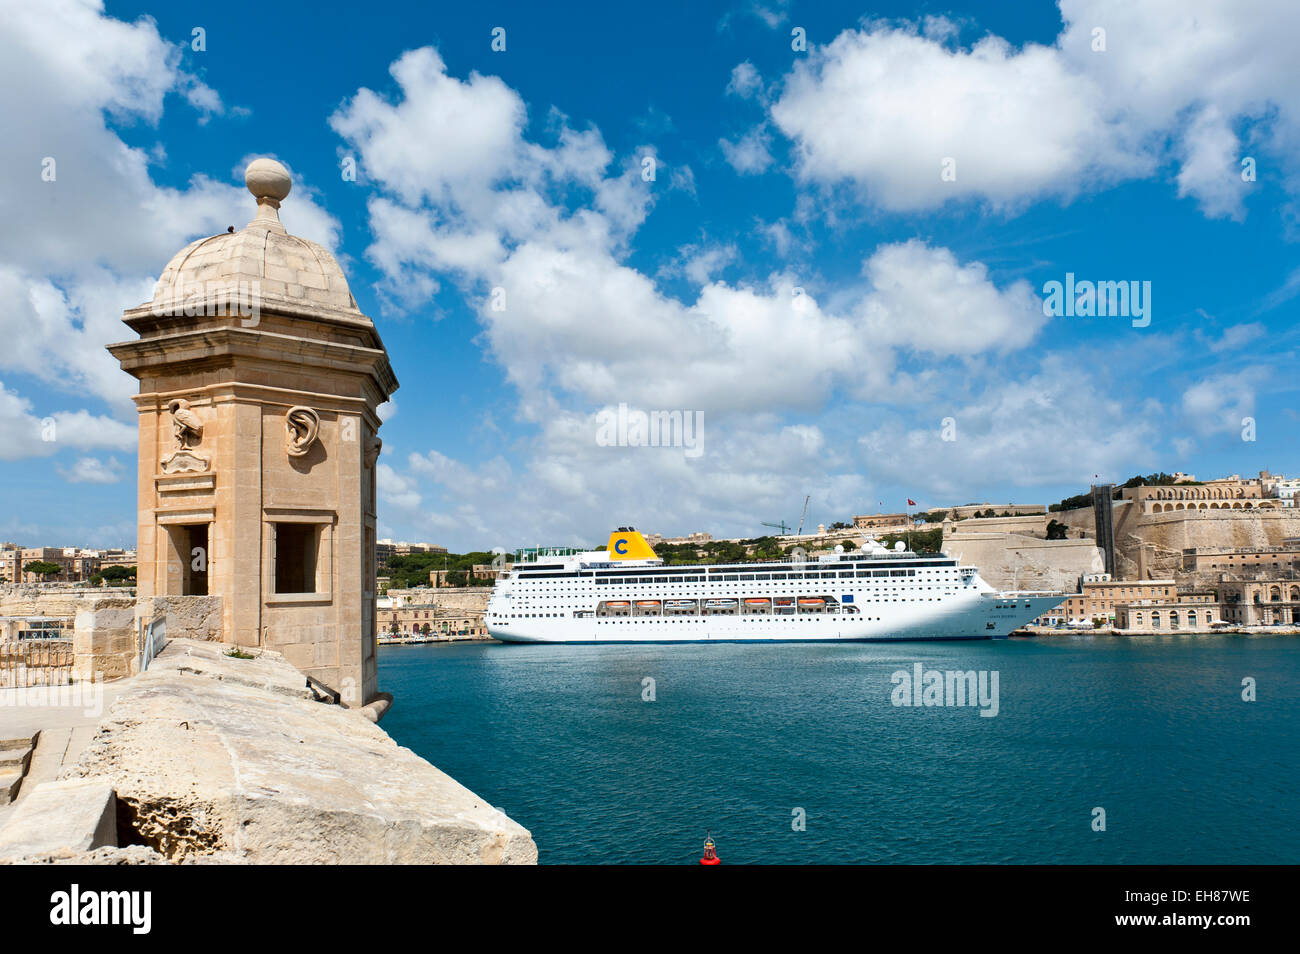 Lookout point, watch tower in Senglea, with a berthed cruise ship in the historic centre at Upper Barrakka Gardens at the back Stock Photo